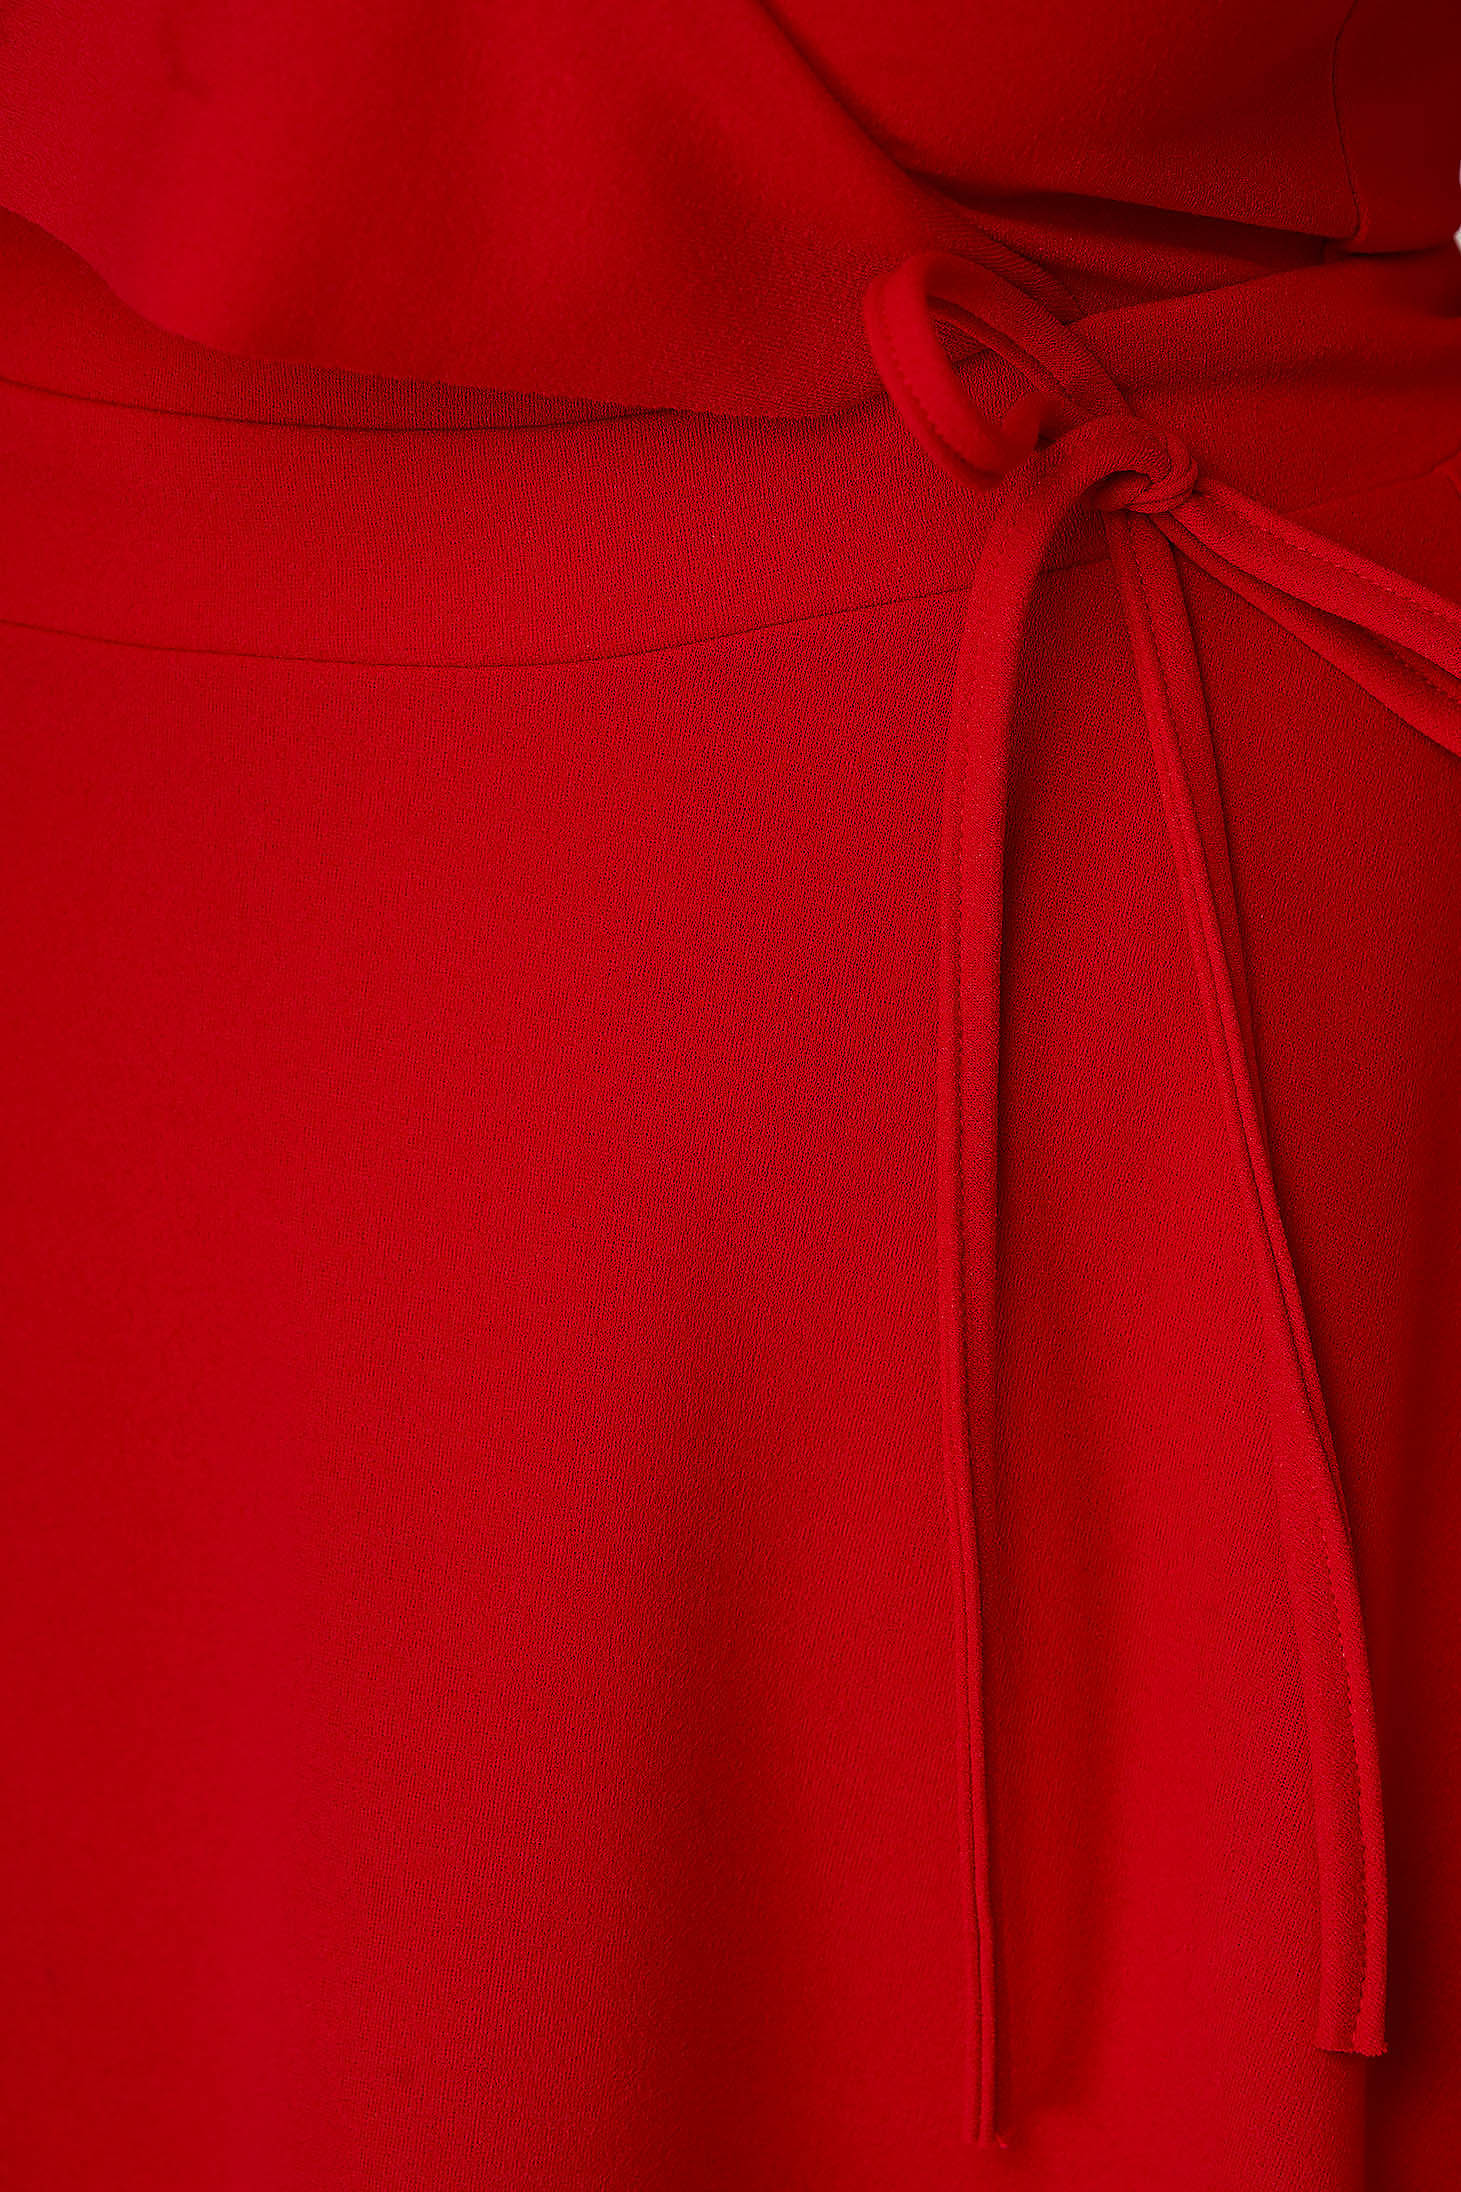 StarShinerS red dress daily short cut cloche scuba with v-neckline without clothing frilly trim around cleavage line 4 - StarShinerS.com